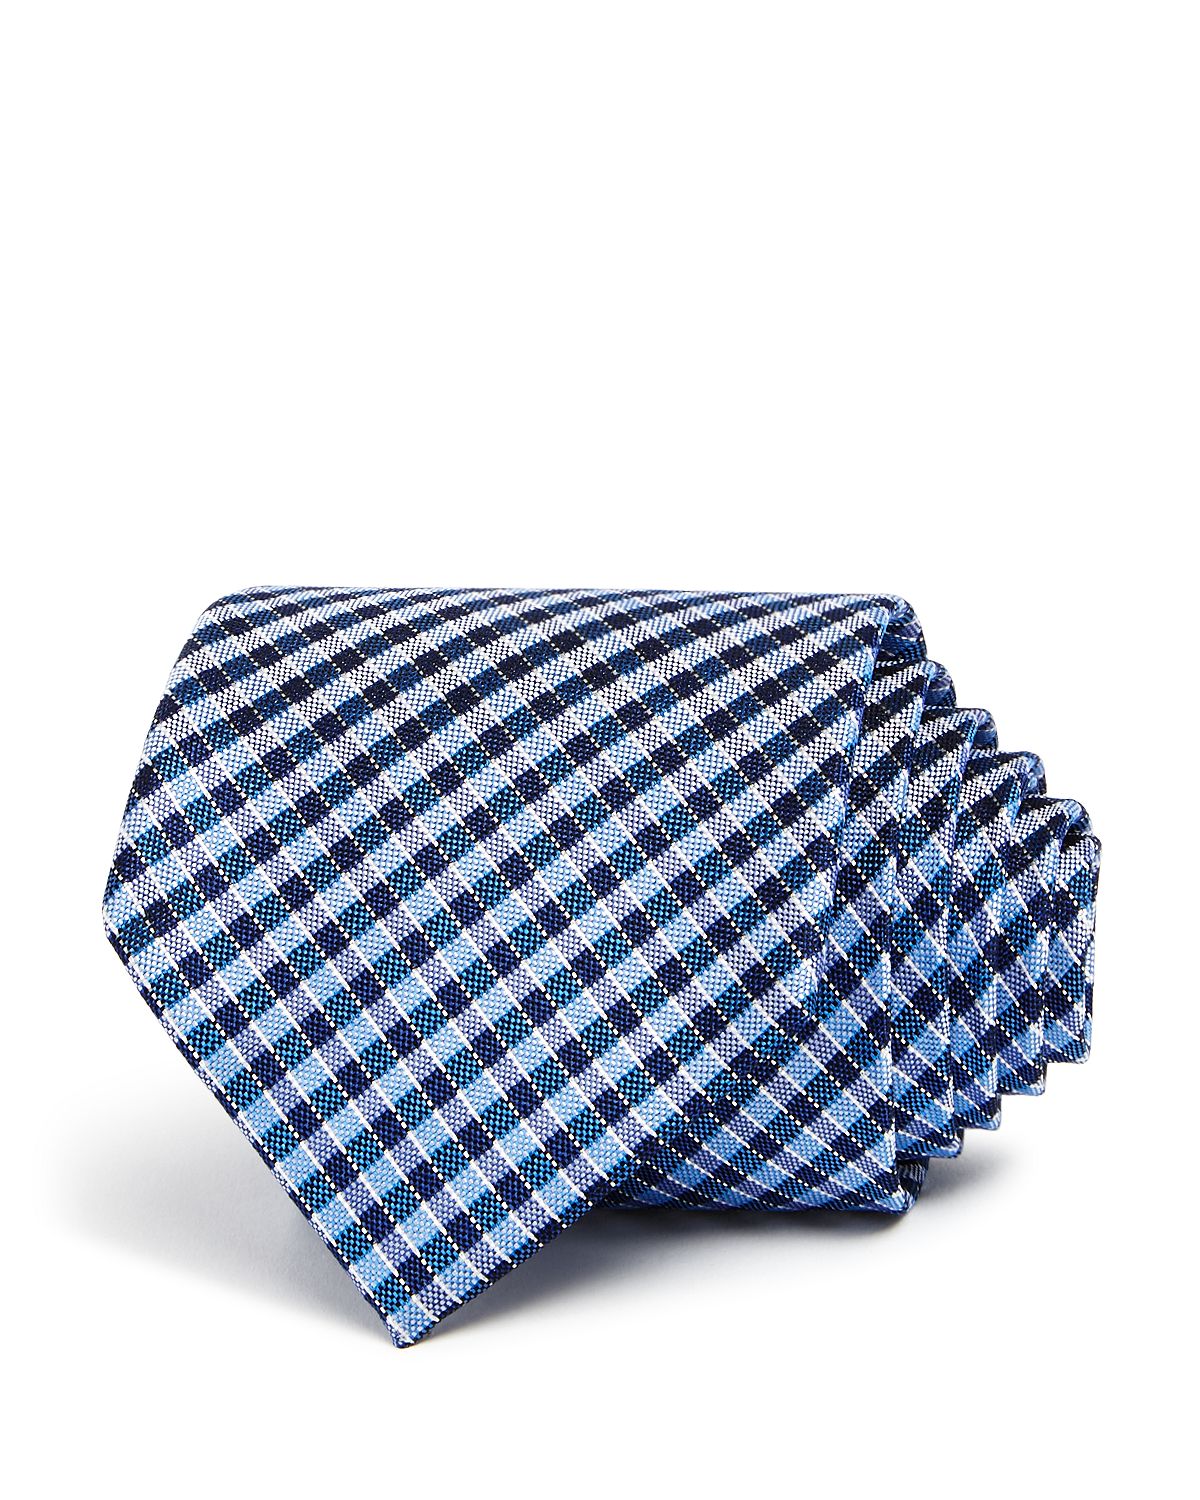 The Men's Store Summer Check Classic Tie Blue